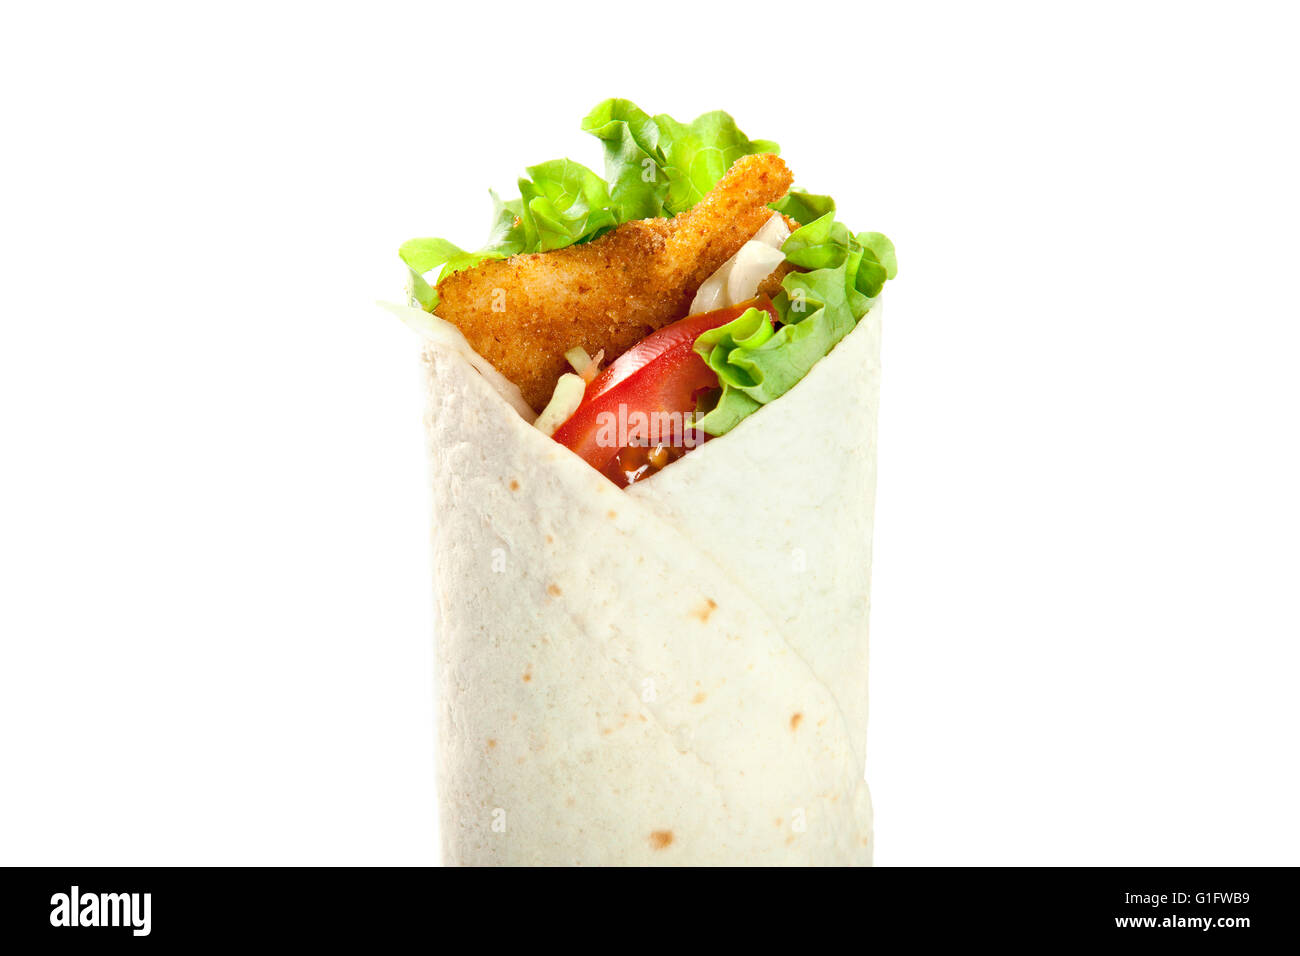 Tortilla with meat and vegetables isolated on white background Stock Photo